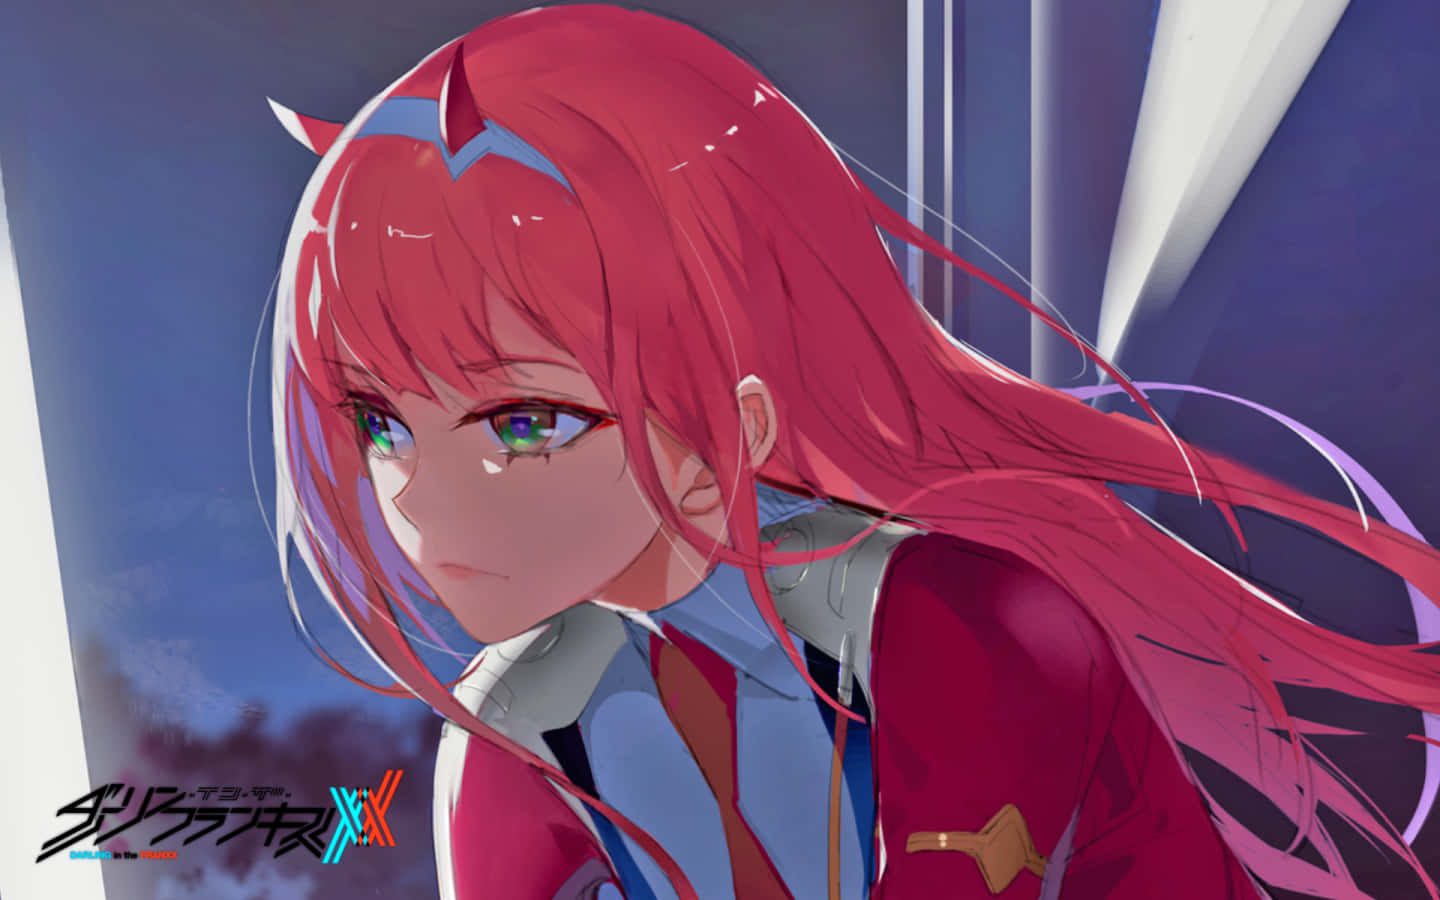 A Stylized Look at Darling in the Franxx